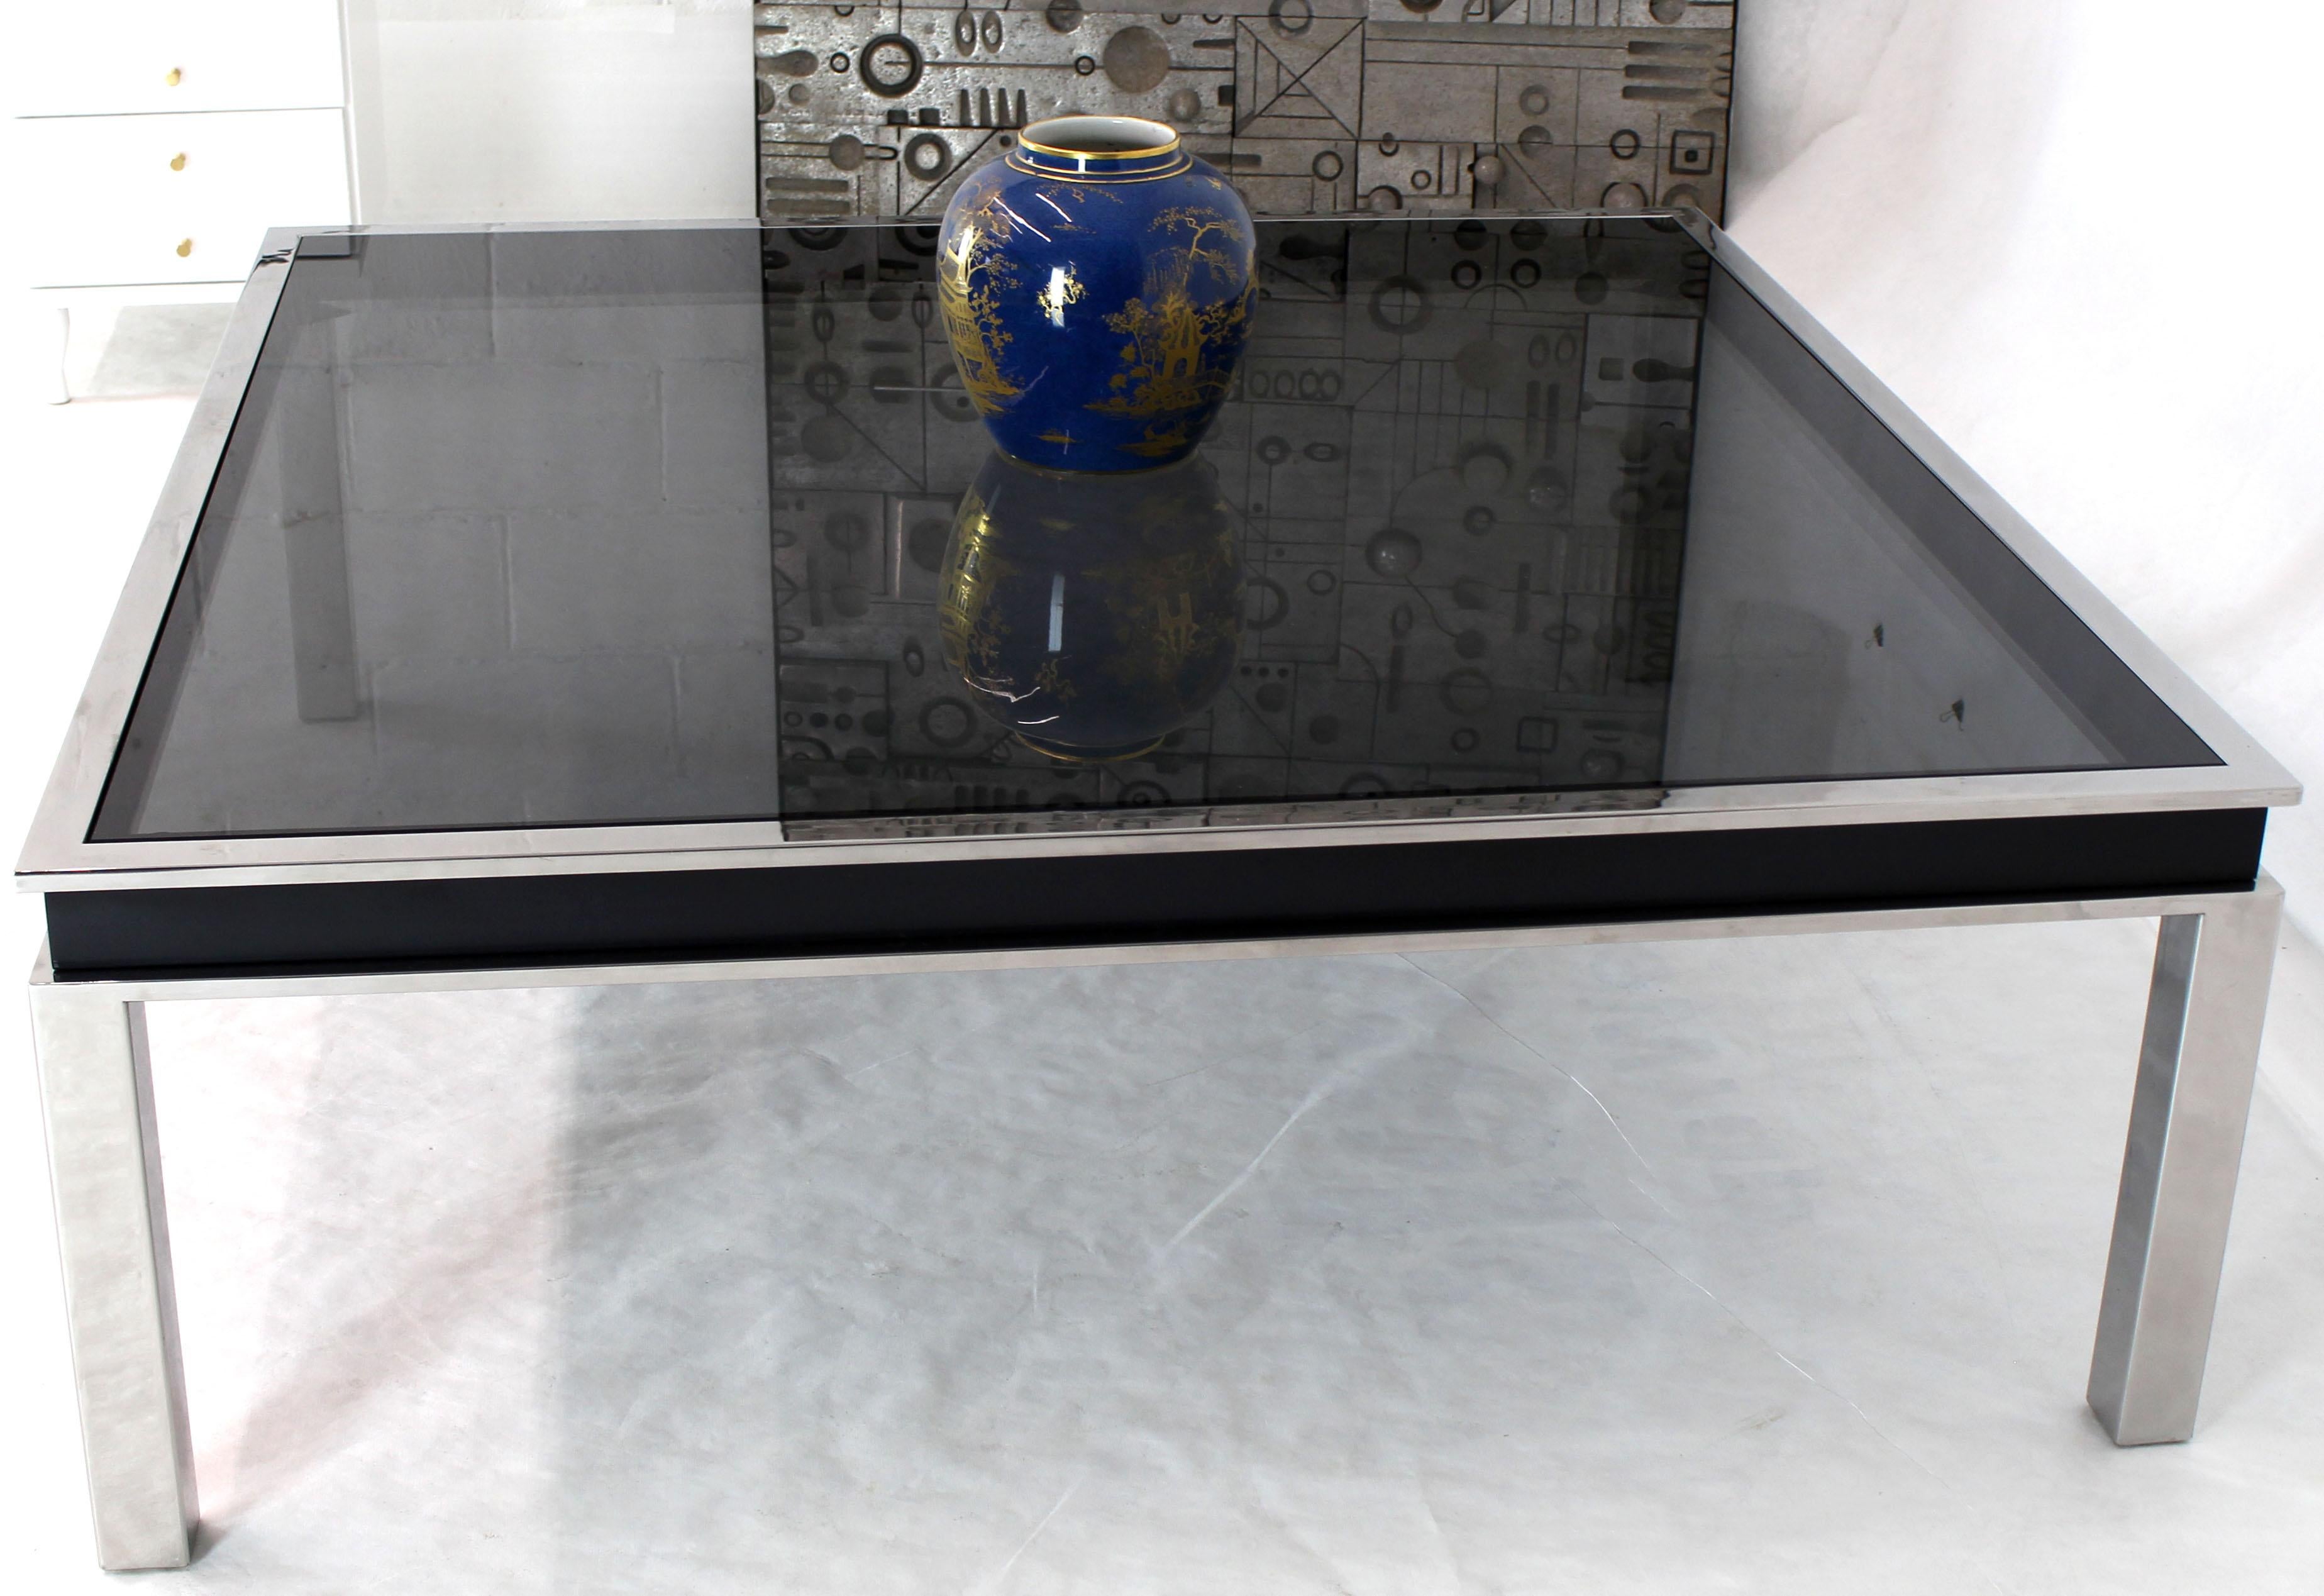 Black onyx glass top extra large 48 x 48 square polished stainless steel center coffee table in style of Milo Baughman.
 